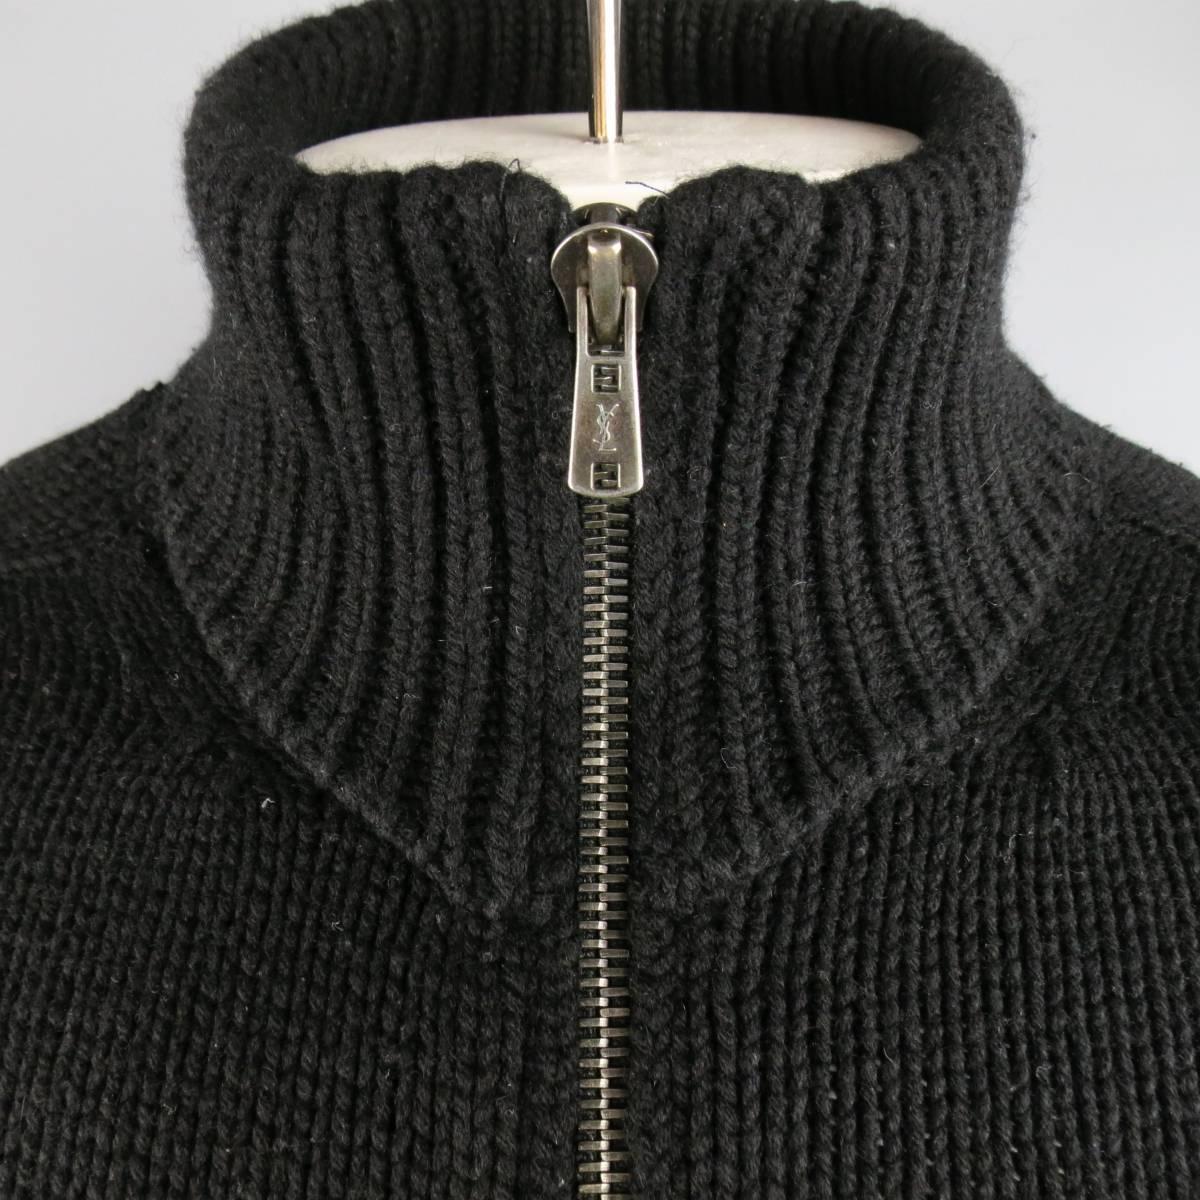 YVES SAINT LAURENT cardigan jacket comes in a thick cashmere knit and features a high, folded collar and dark silver tone gray zip up front. Wear throughout. Made in Italy.
 
Good Pre-Owned Condition.
Marked: M
 
Measurements:
 
Shoulder: 17